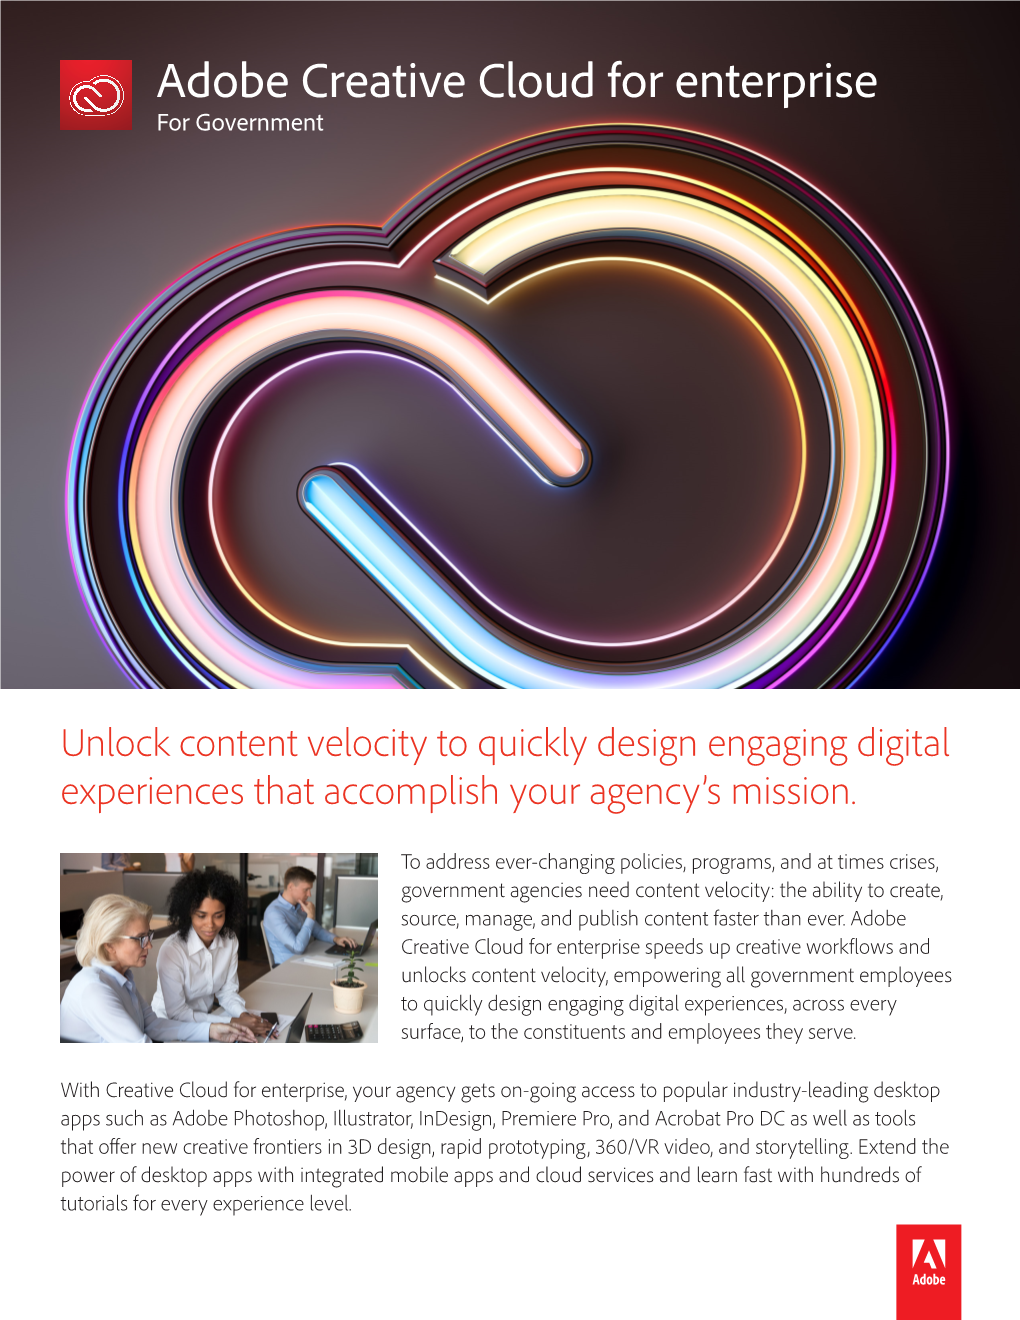 Adobe Creative Cloud for Enterprise for Government